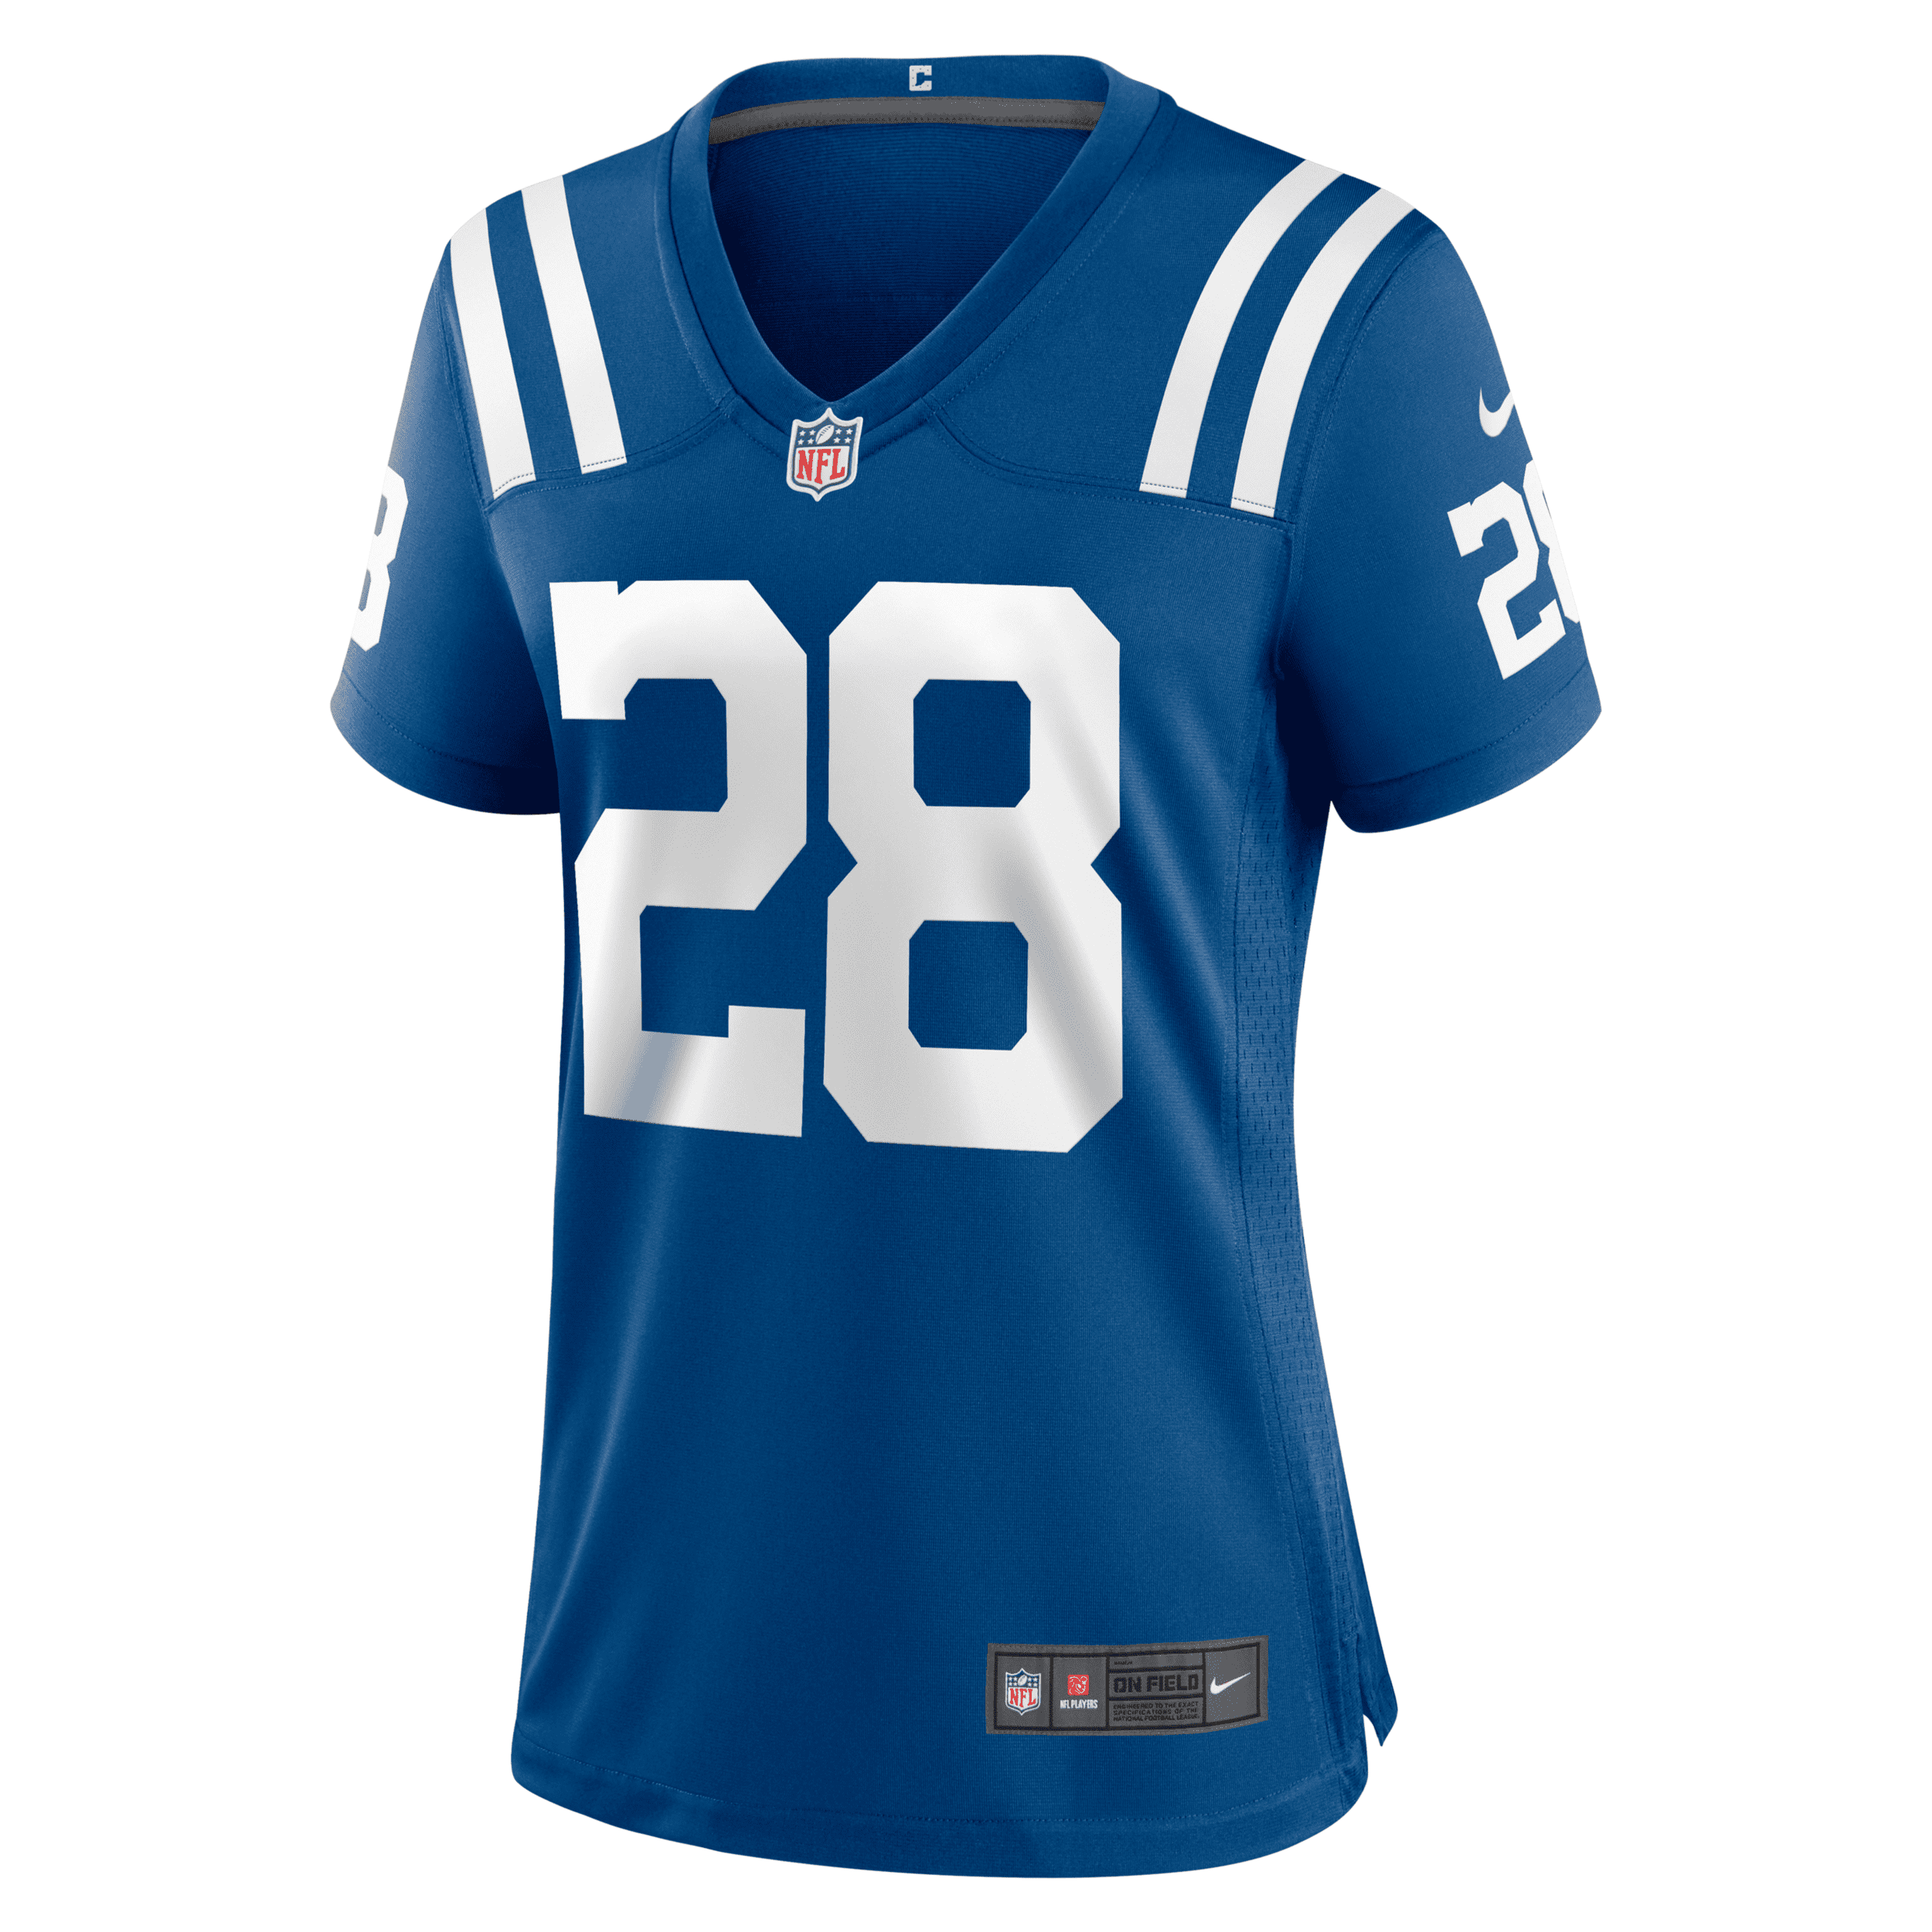 Shop Nike Women's Nfl Indianapolis Colts (jonathan Taylor) Game Football Jersey In Blue